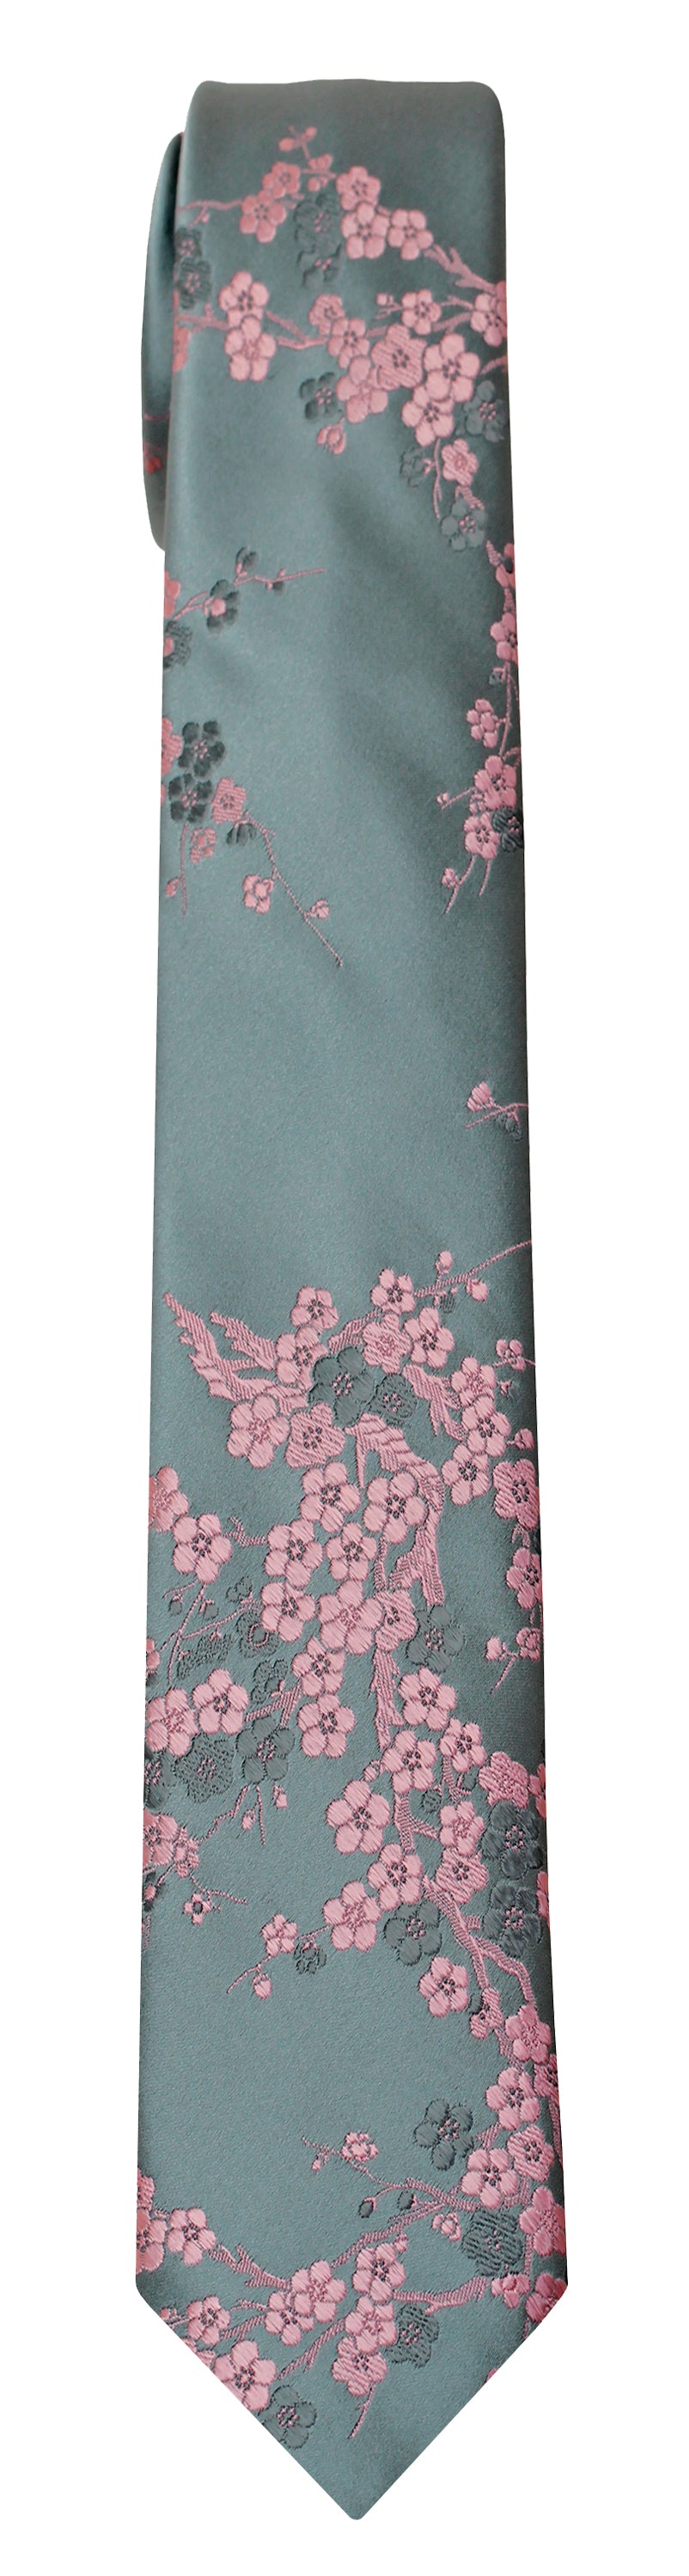 Mimi Fong Cherry Blossom Tie in Slate